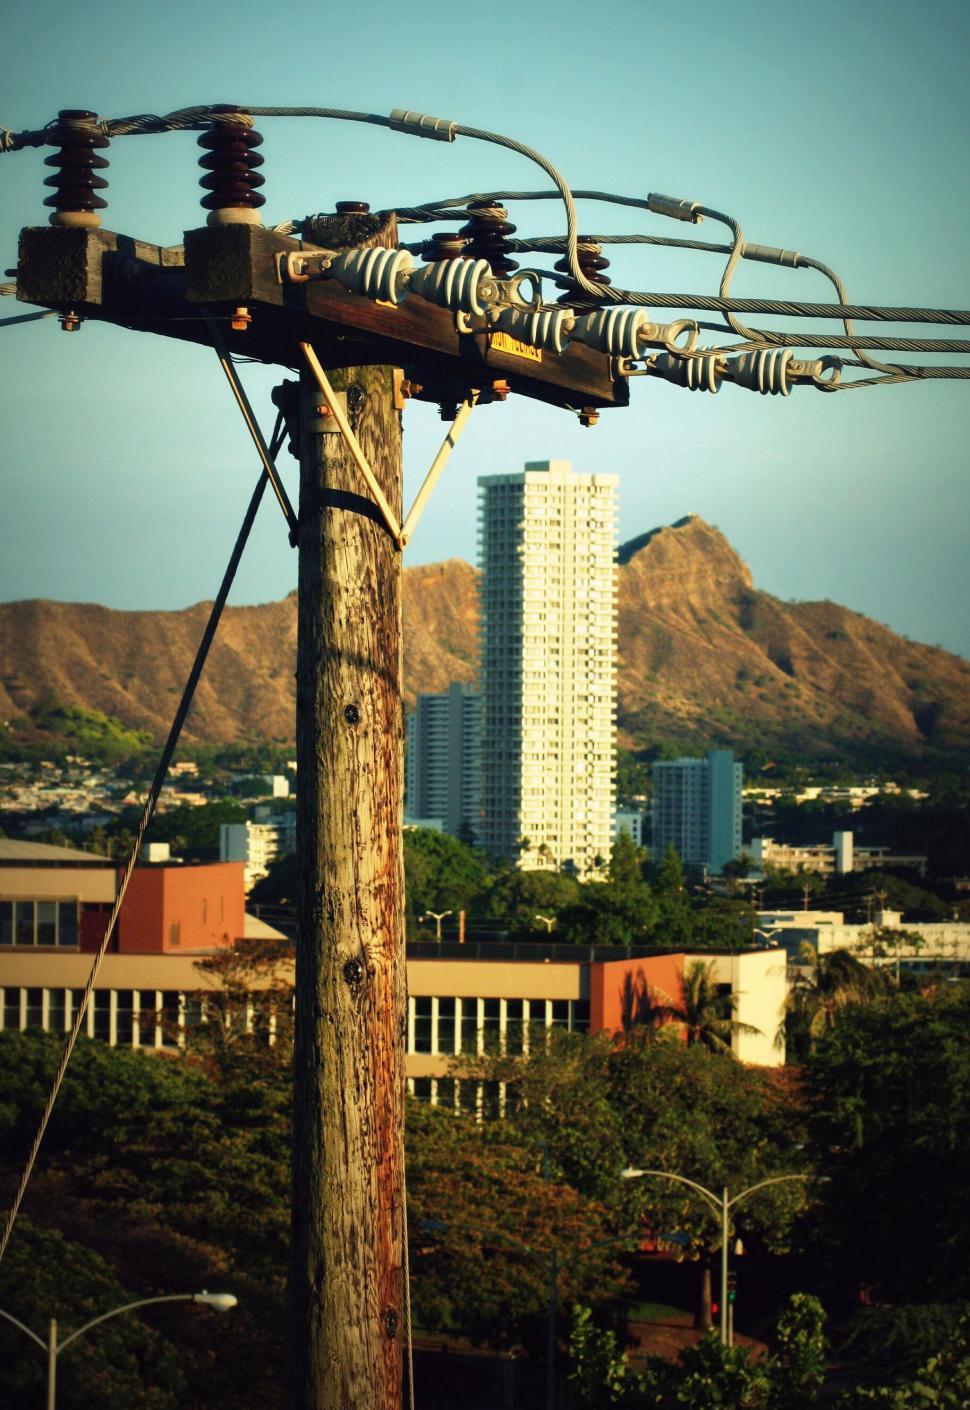 Free Image of Urban landscape with a focus on electrical pole 